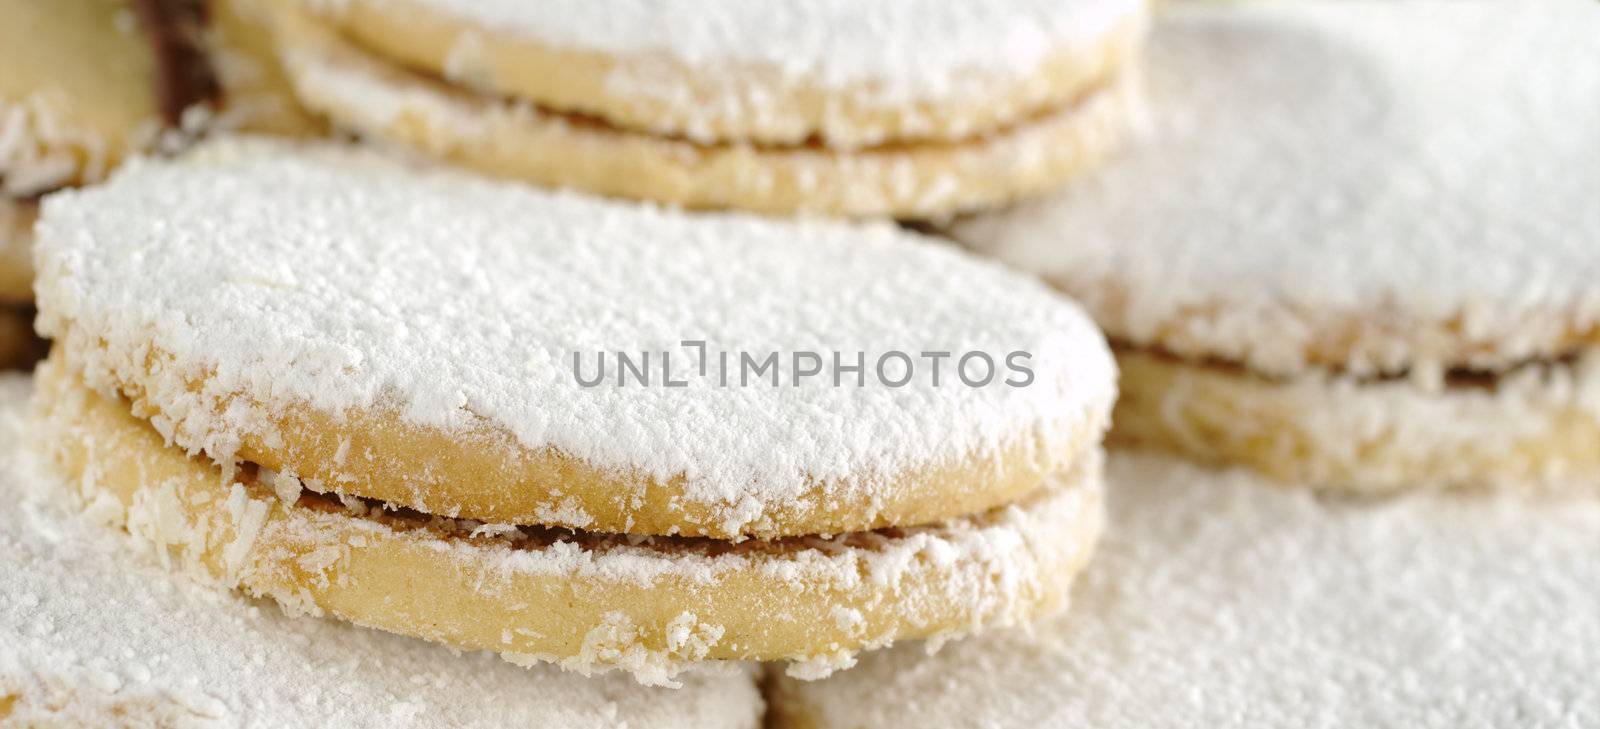 Closeup of Peruvian cookies called Alfajor filled with a caramel-like cream called Manjar and with sugar powder on top (Very Shallow Depth of Field, Focus on the front)